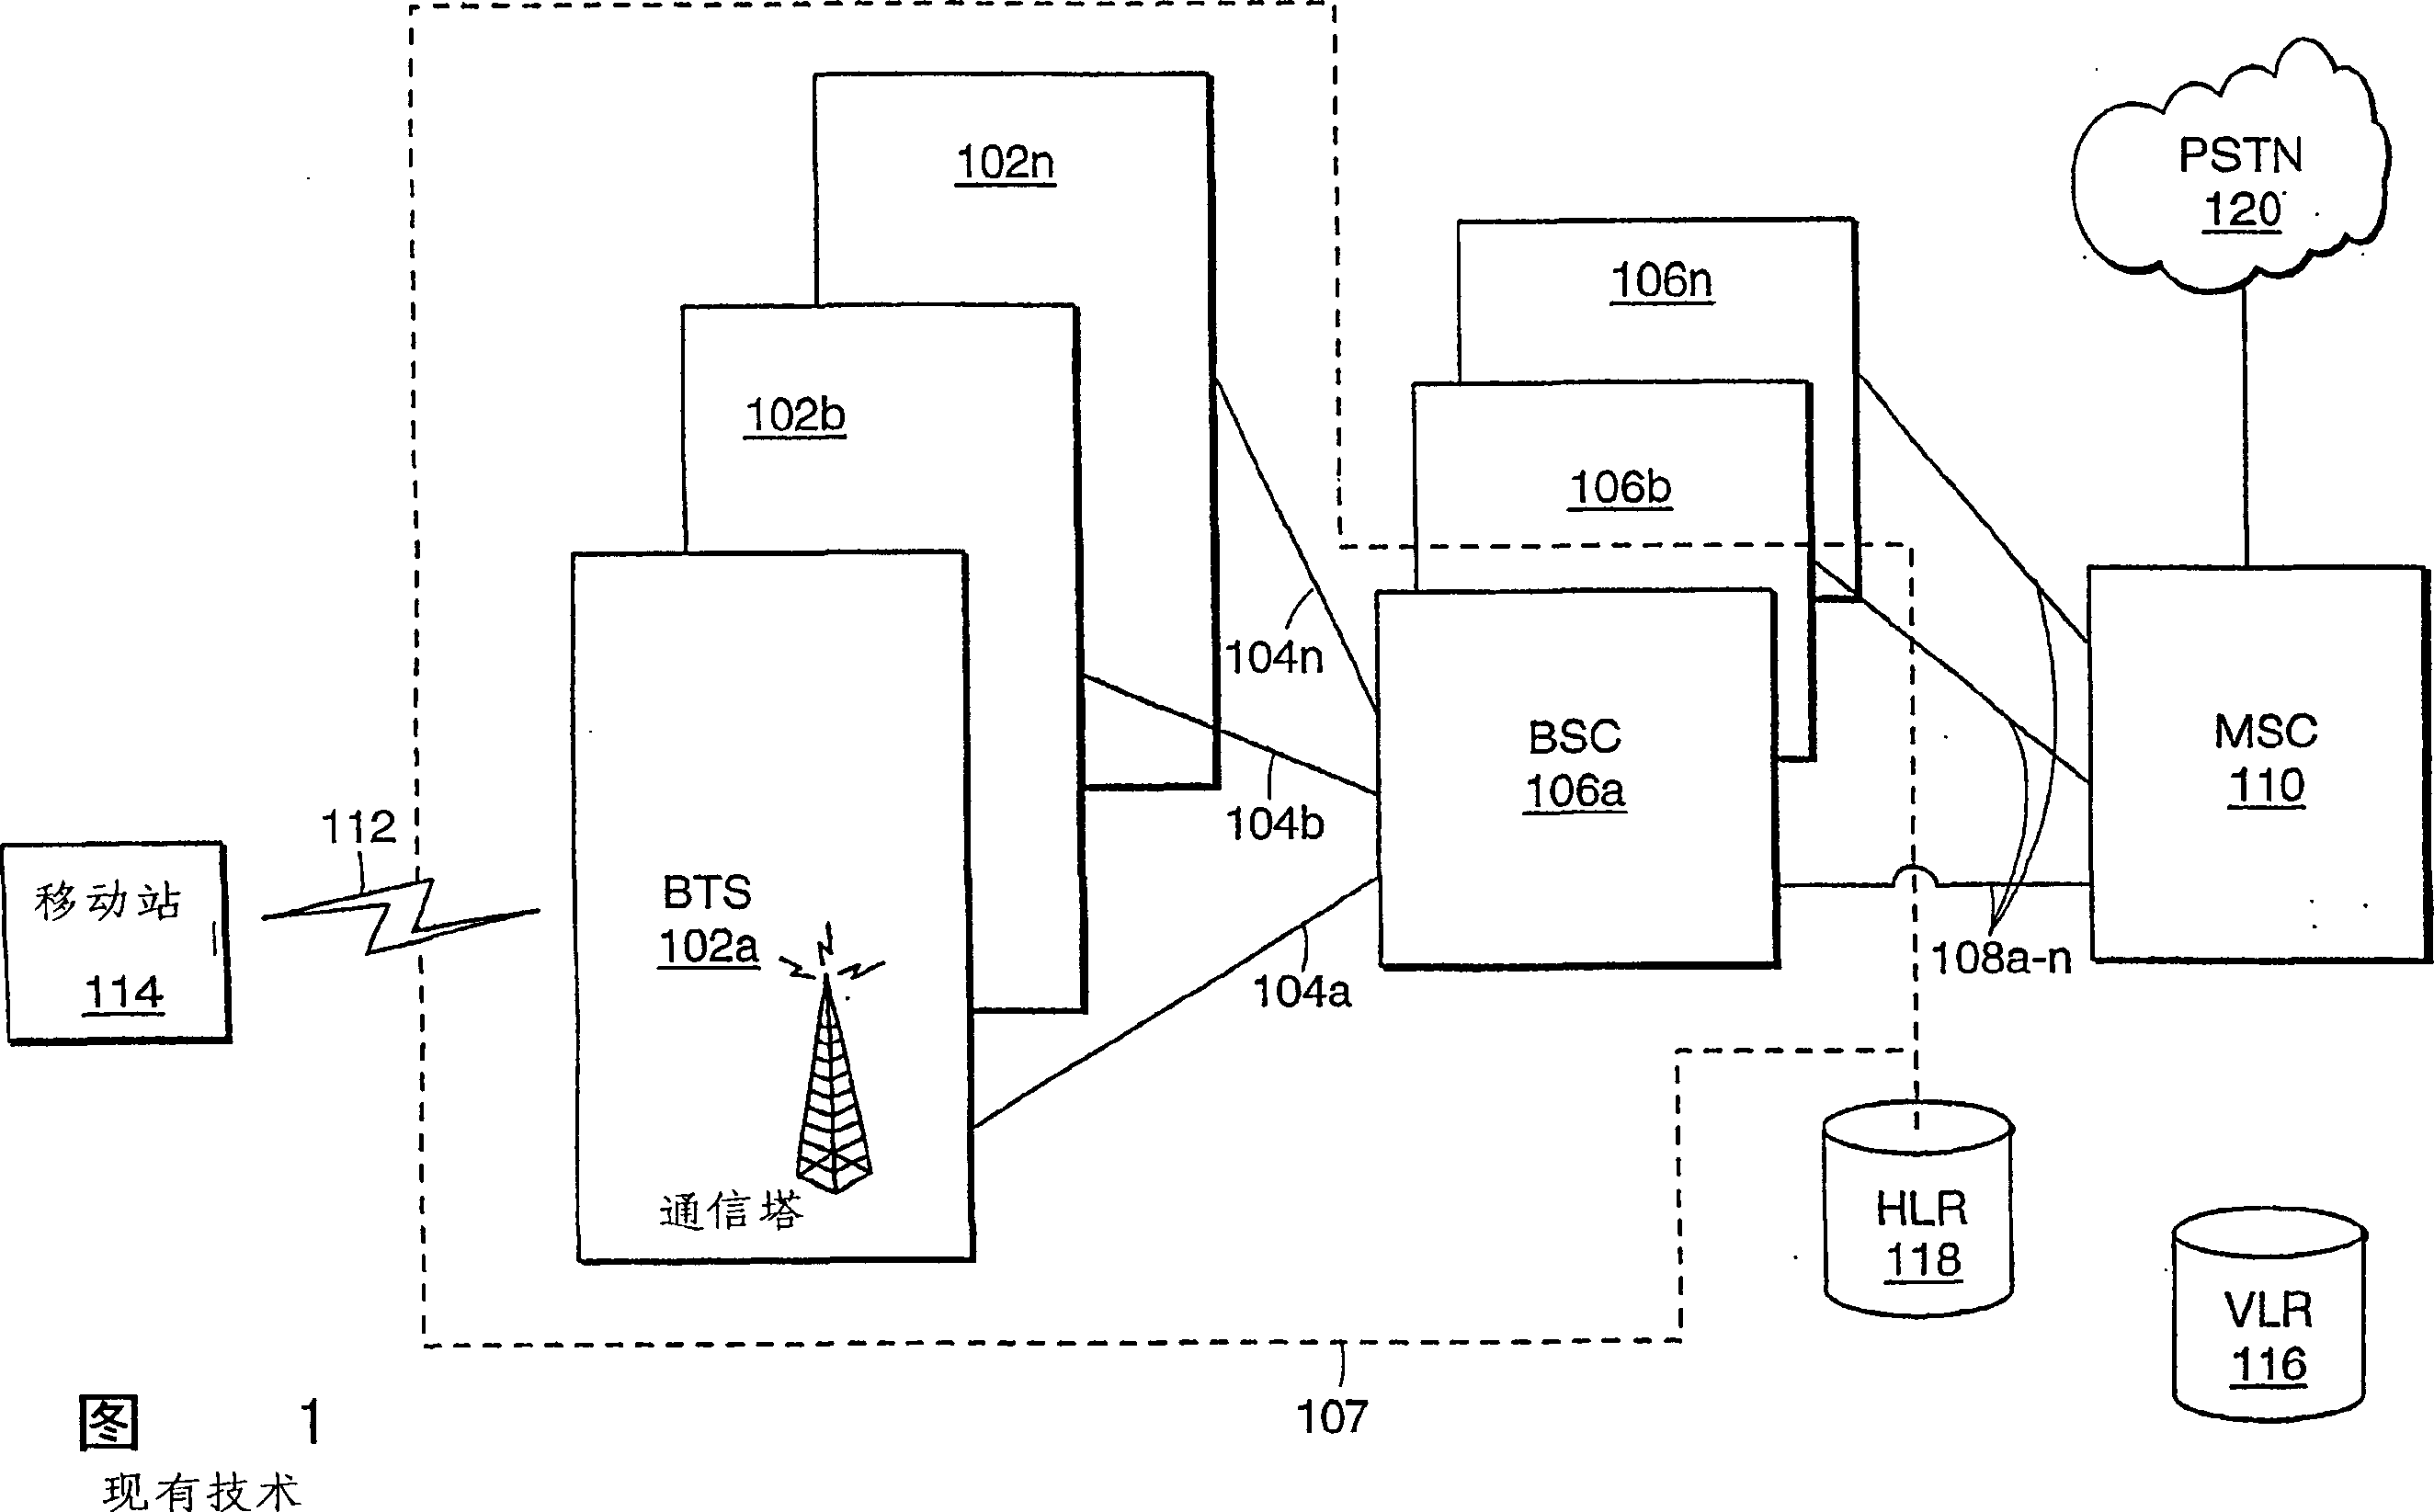 System and method of preserving point codes in a mobile network having a proxy switch